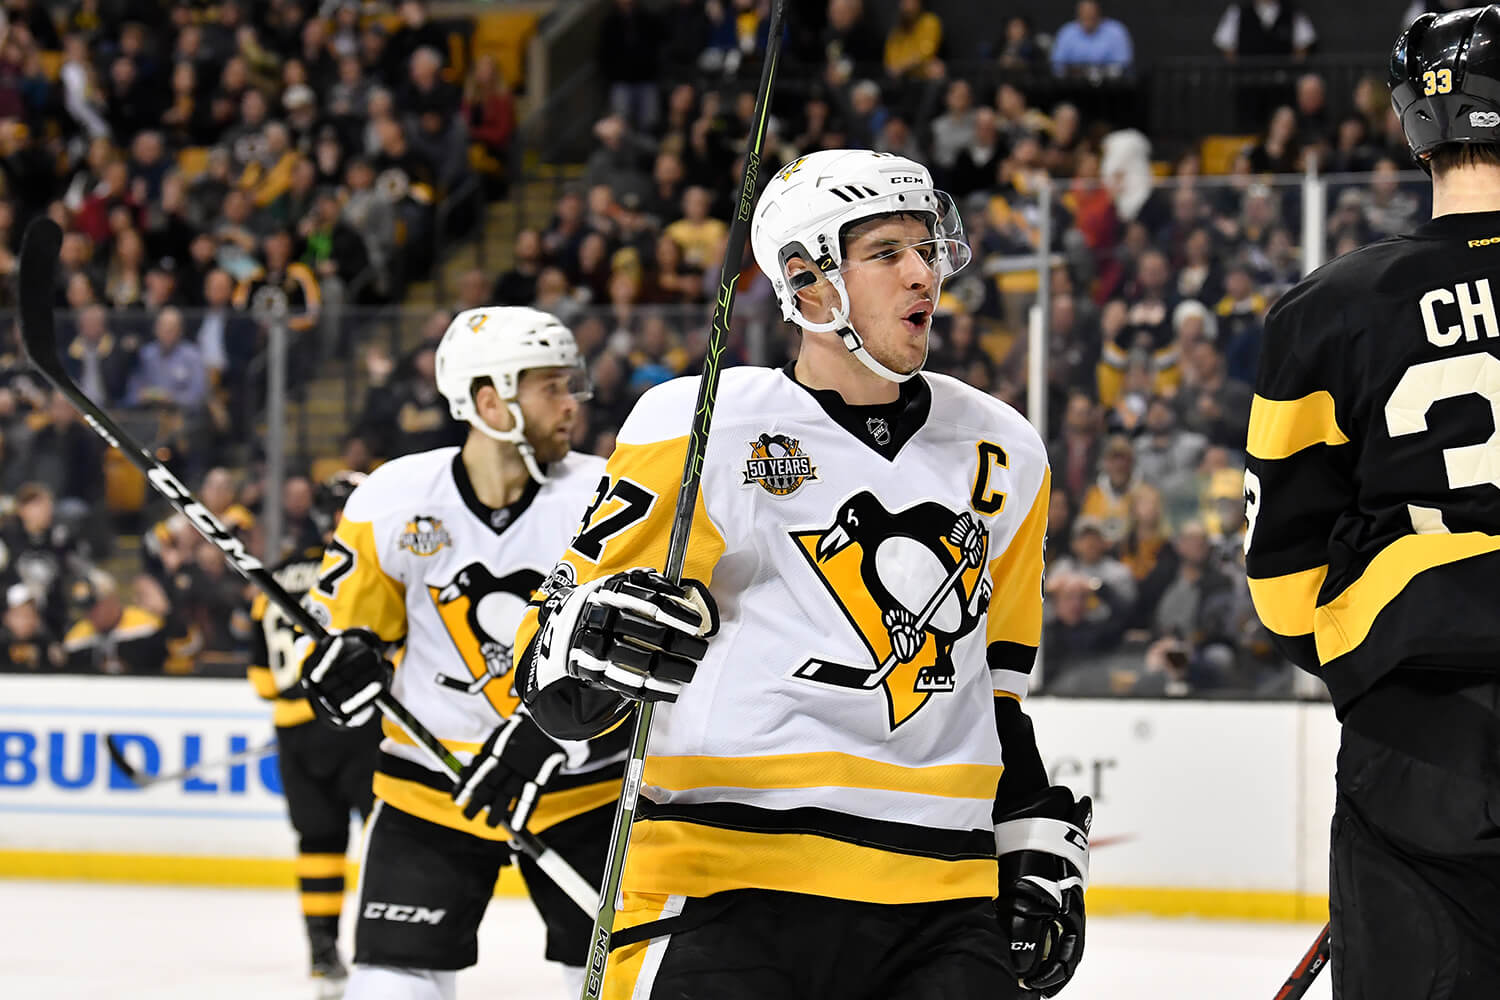 Crosby Reaches 1K Milestone in Costly Game